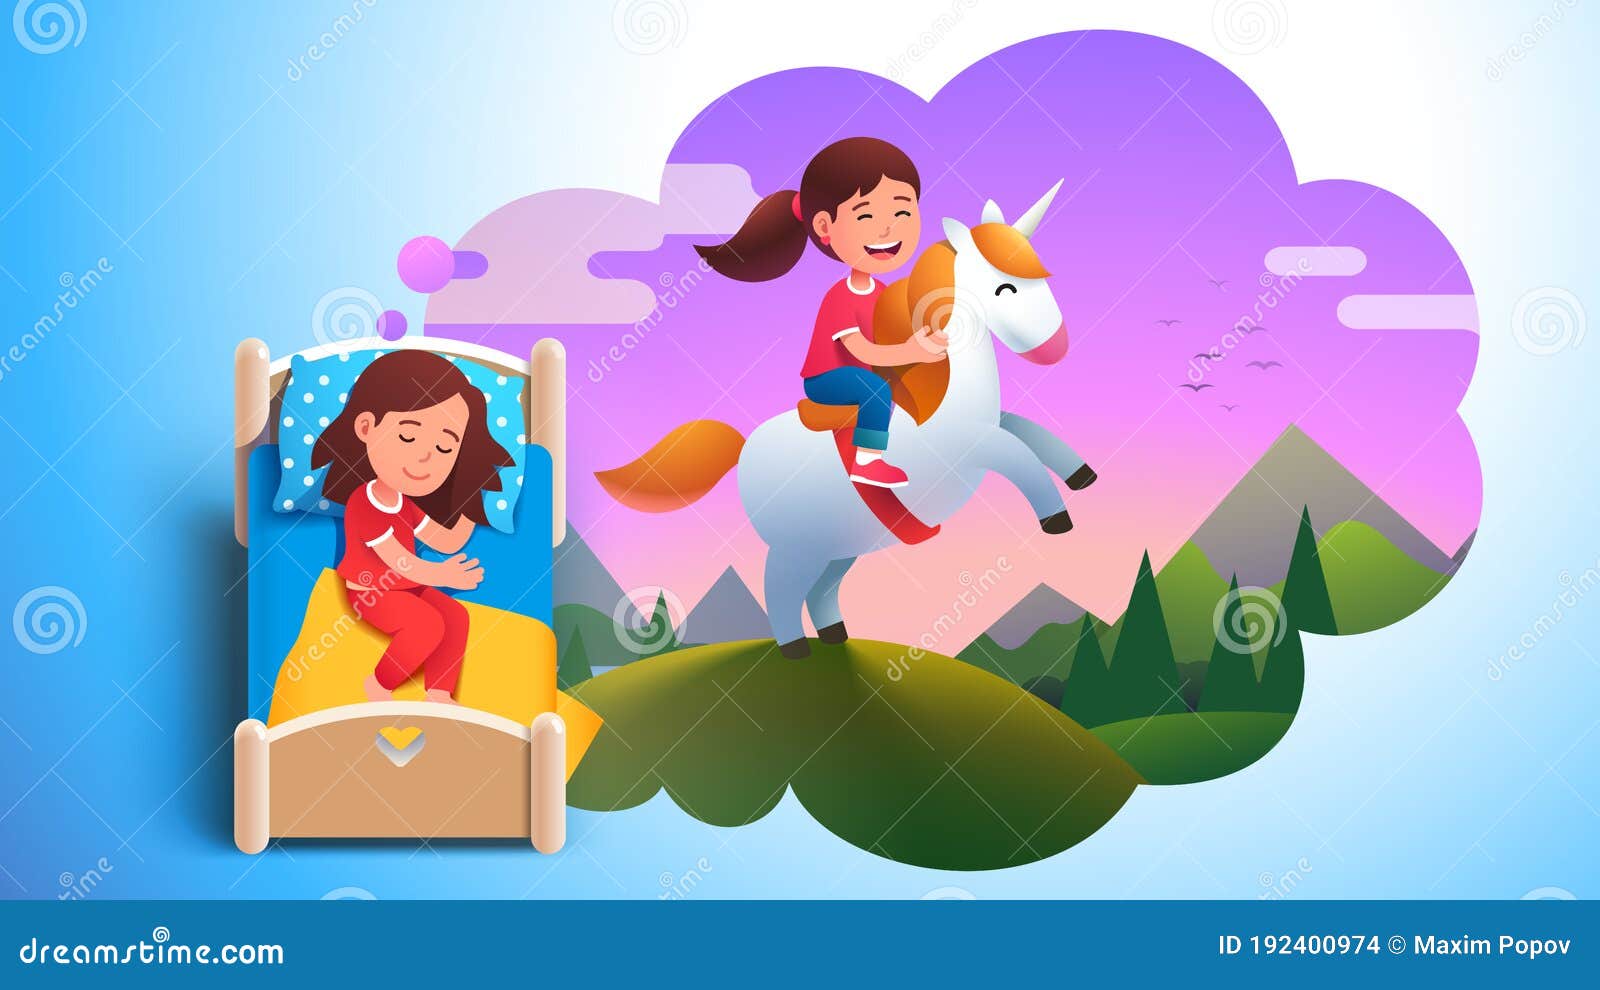 Girl Kid Sleeping Dreaming About Riding Unicorn Stock Vector